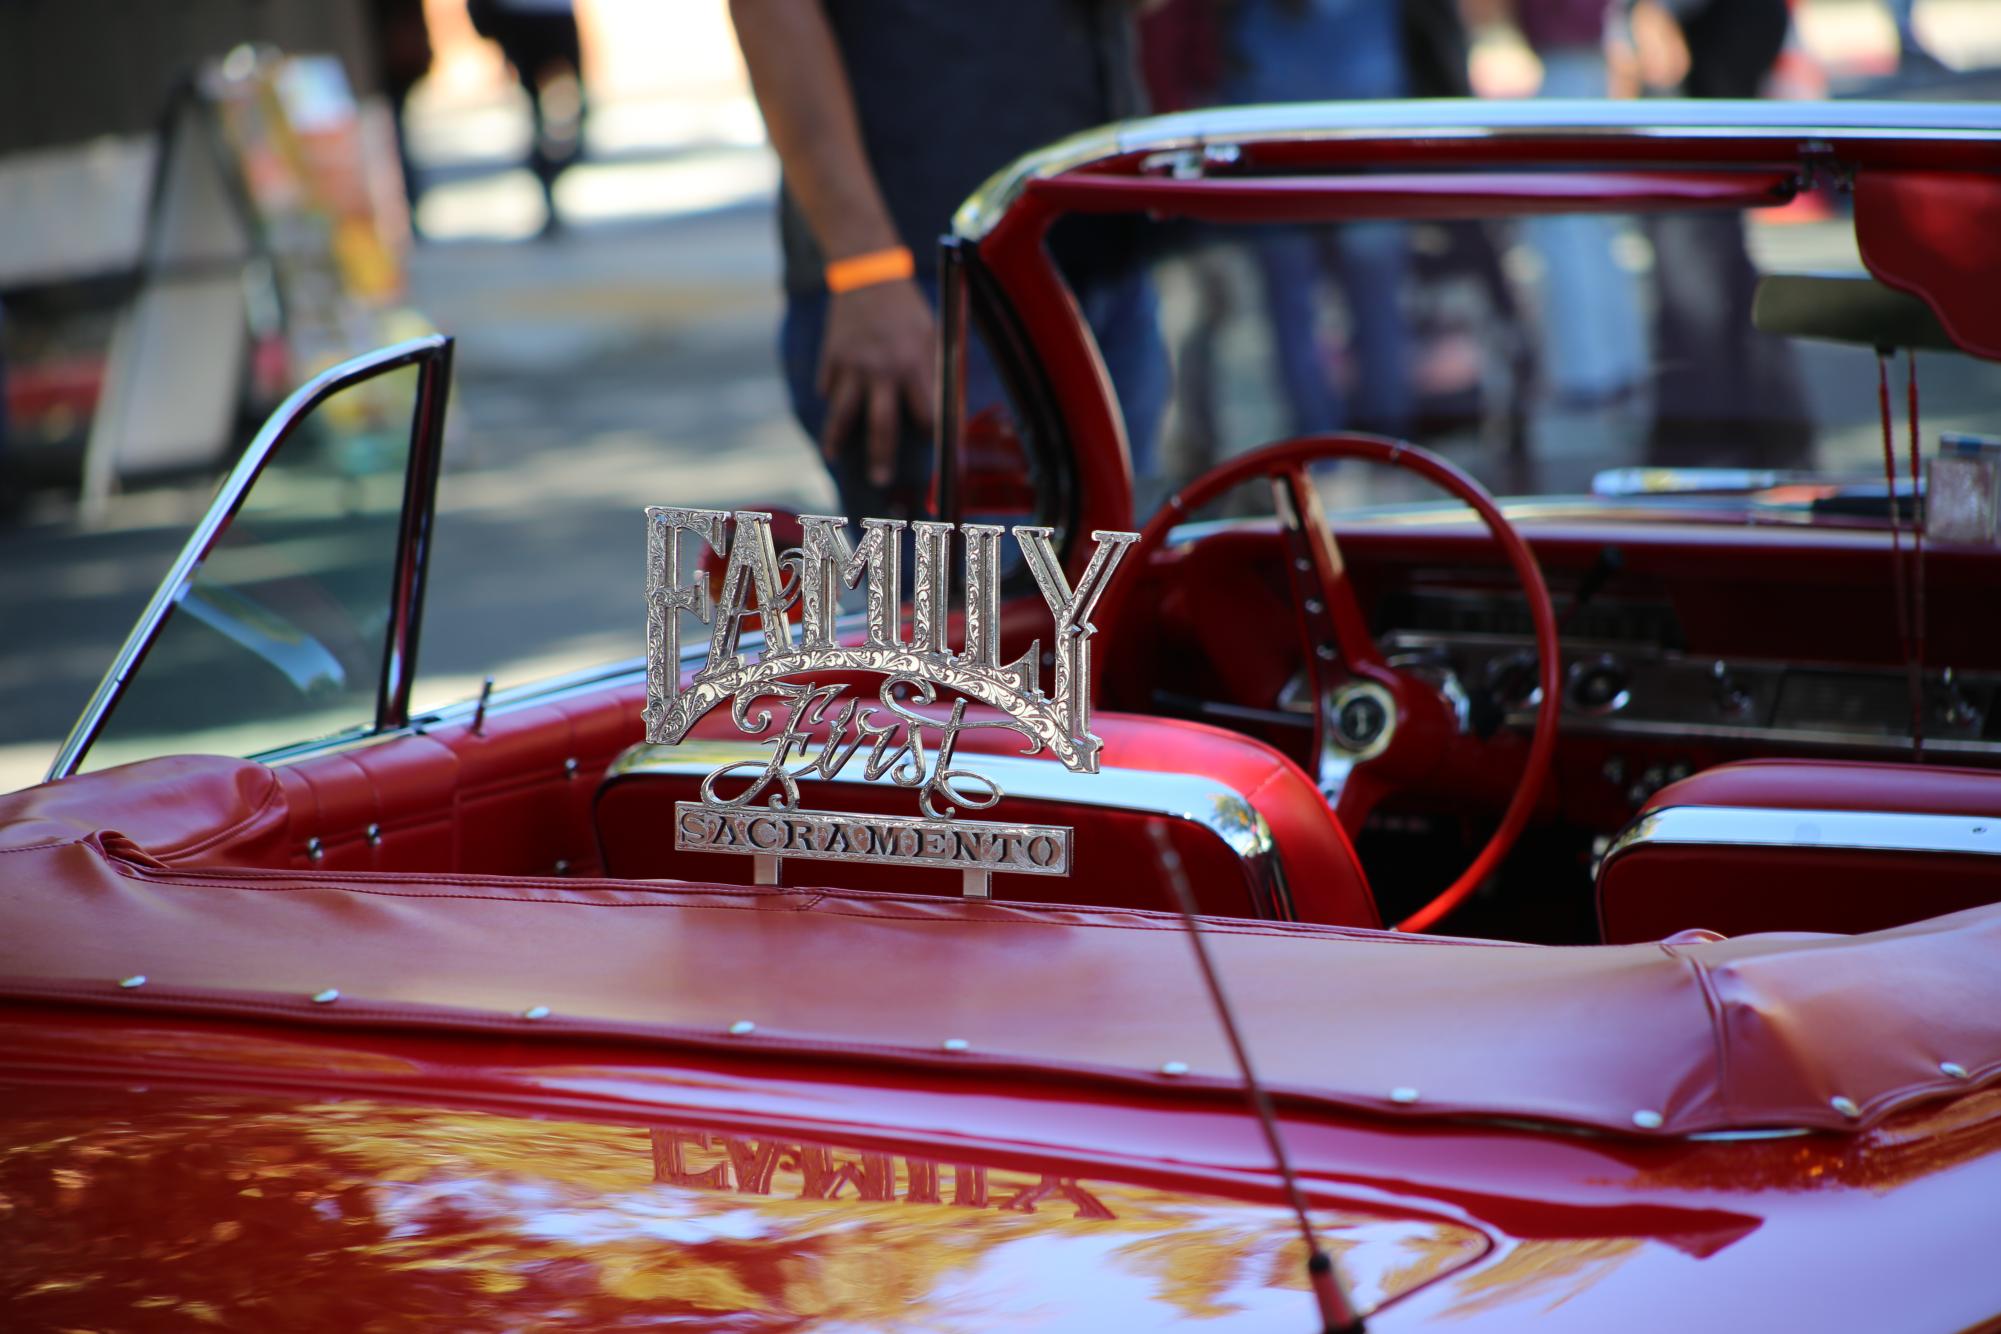 A Low Rider Block Party hosted by the California Museum lined all of 11th Street in downtown Sacramento with lowriders from local car clubs Sunday Oct. 29, 2023. The party was hosted in celebration of the new Boulevard Dreams California exhibit and featured cars from clubs across California such as the one from “Family First Car & Bike Club” located in Sacramento.